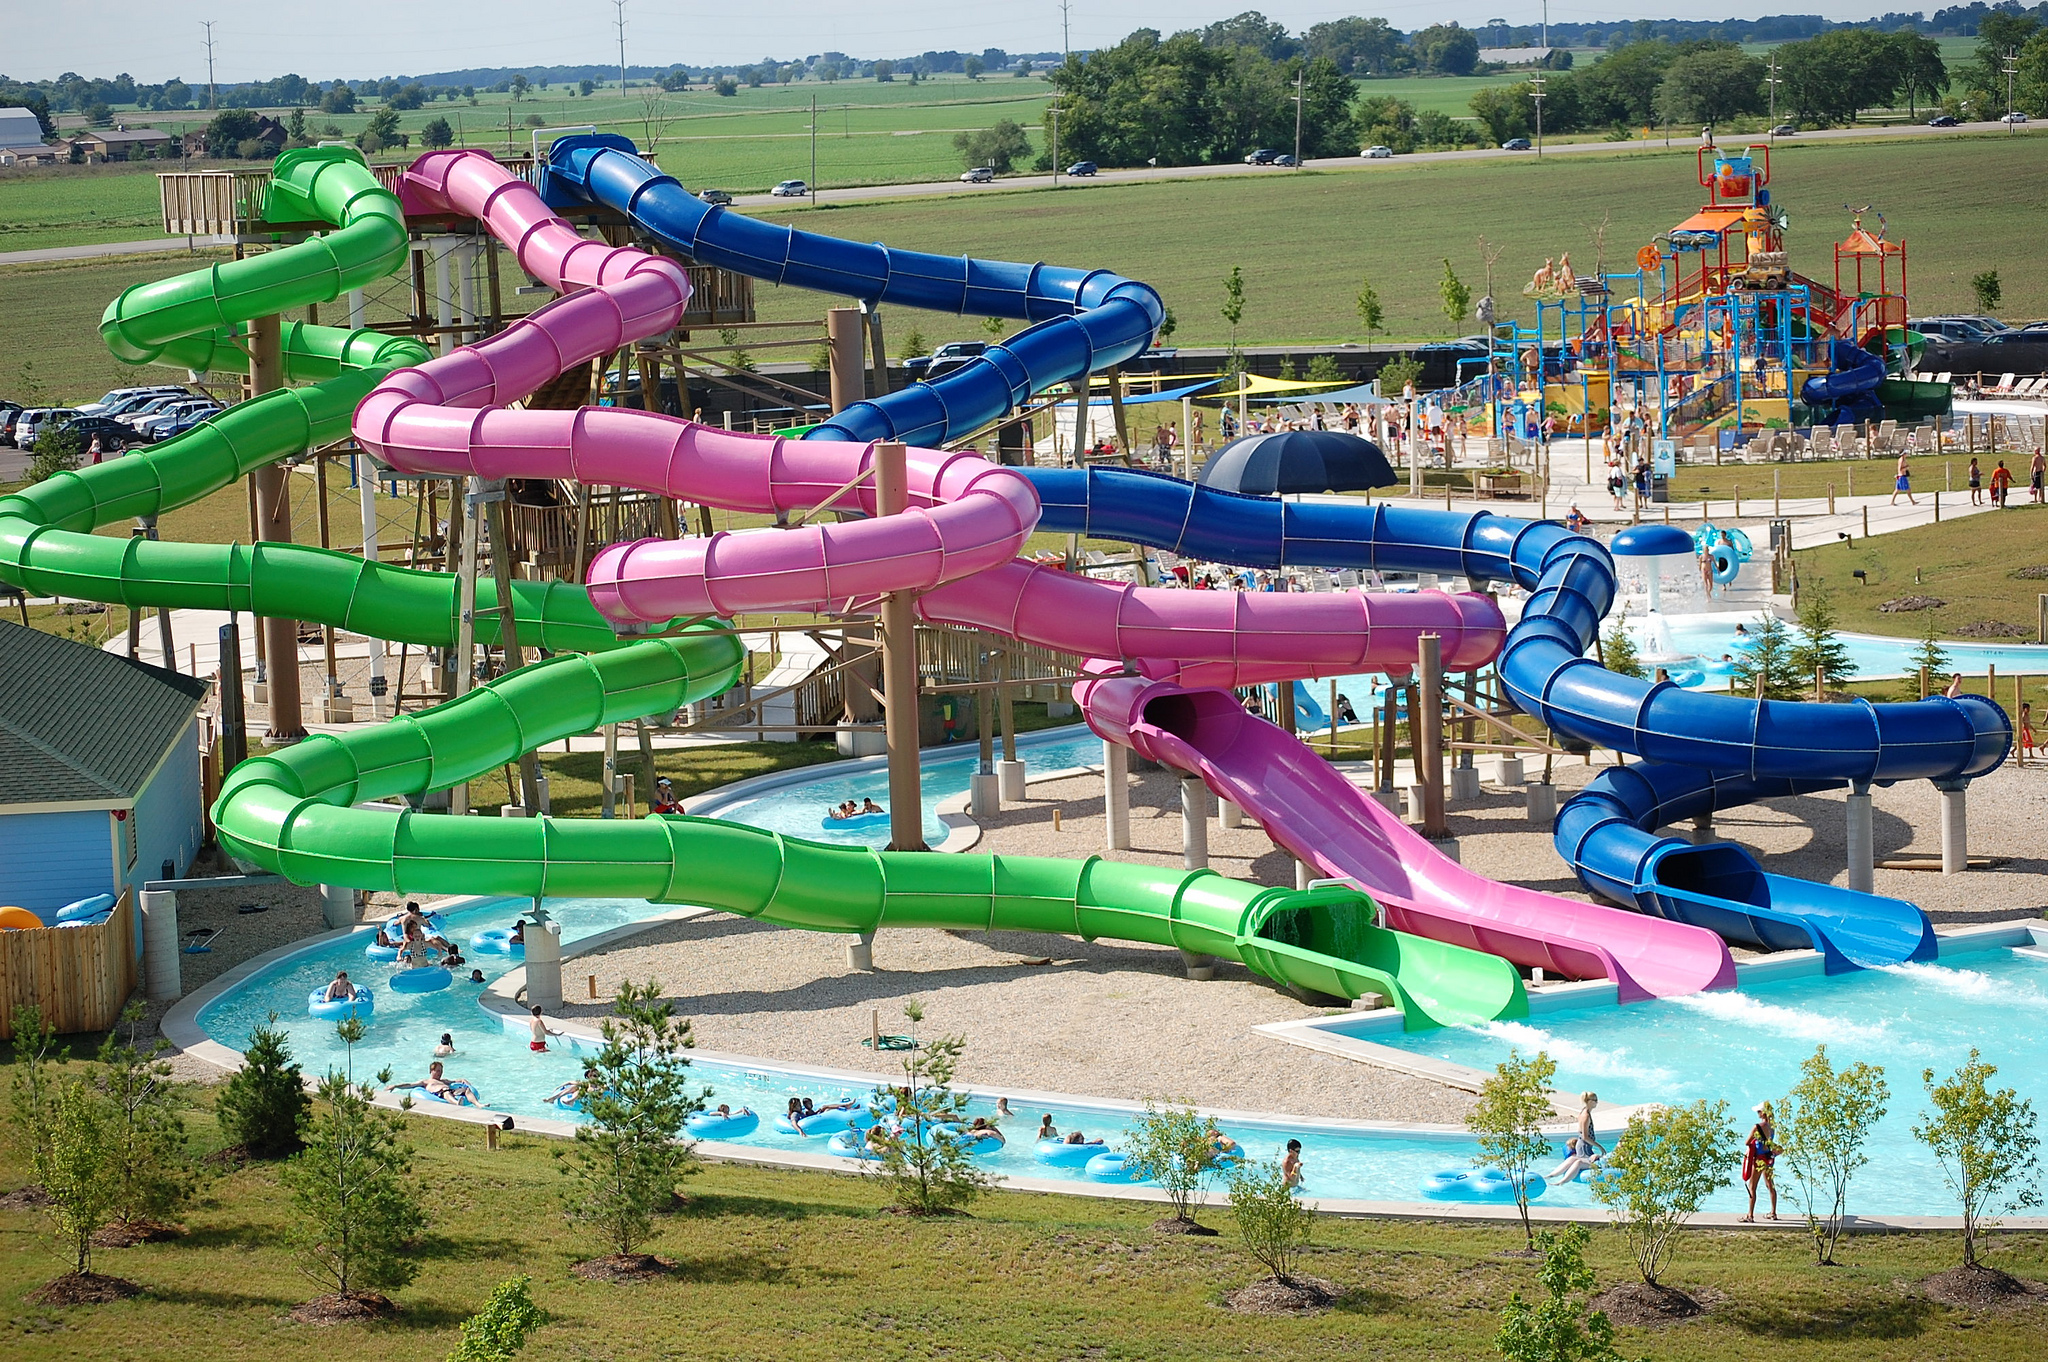 Illinois Largest Waterpark Raging Waves Opens For The Summer On